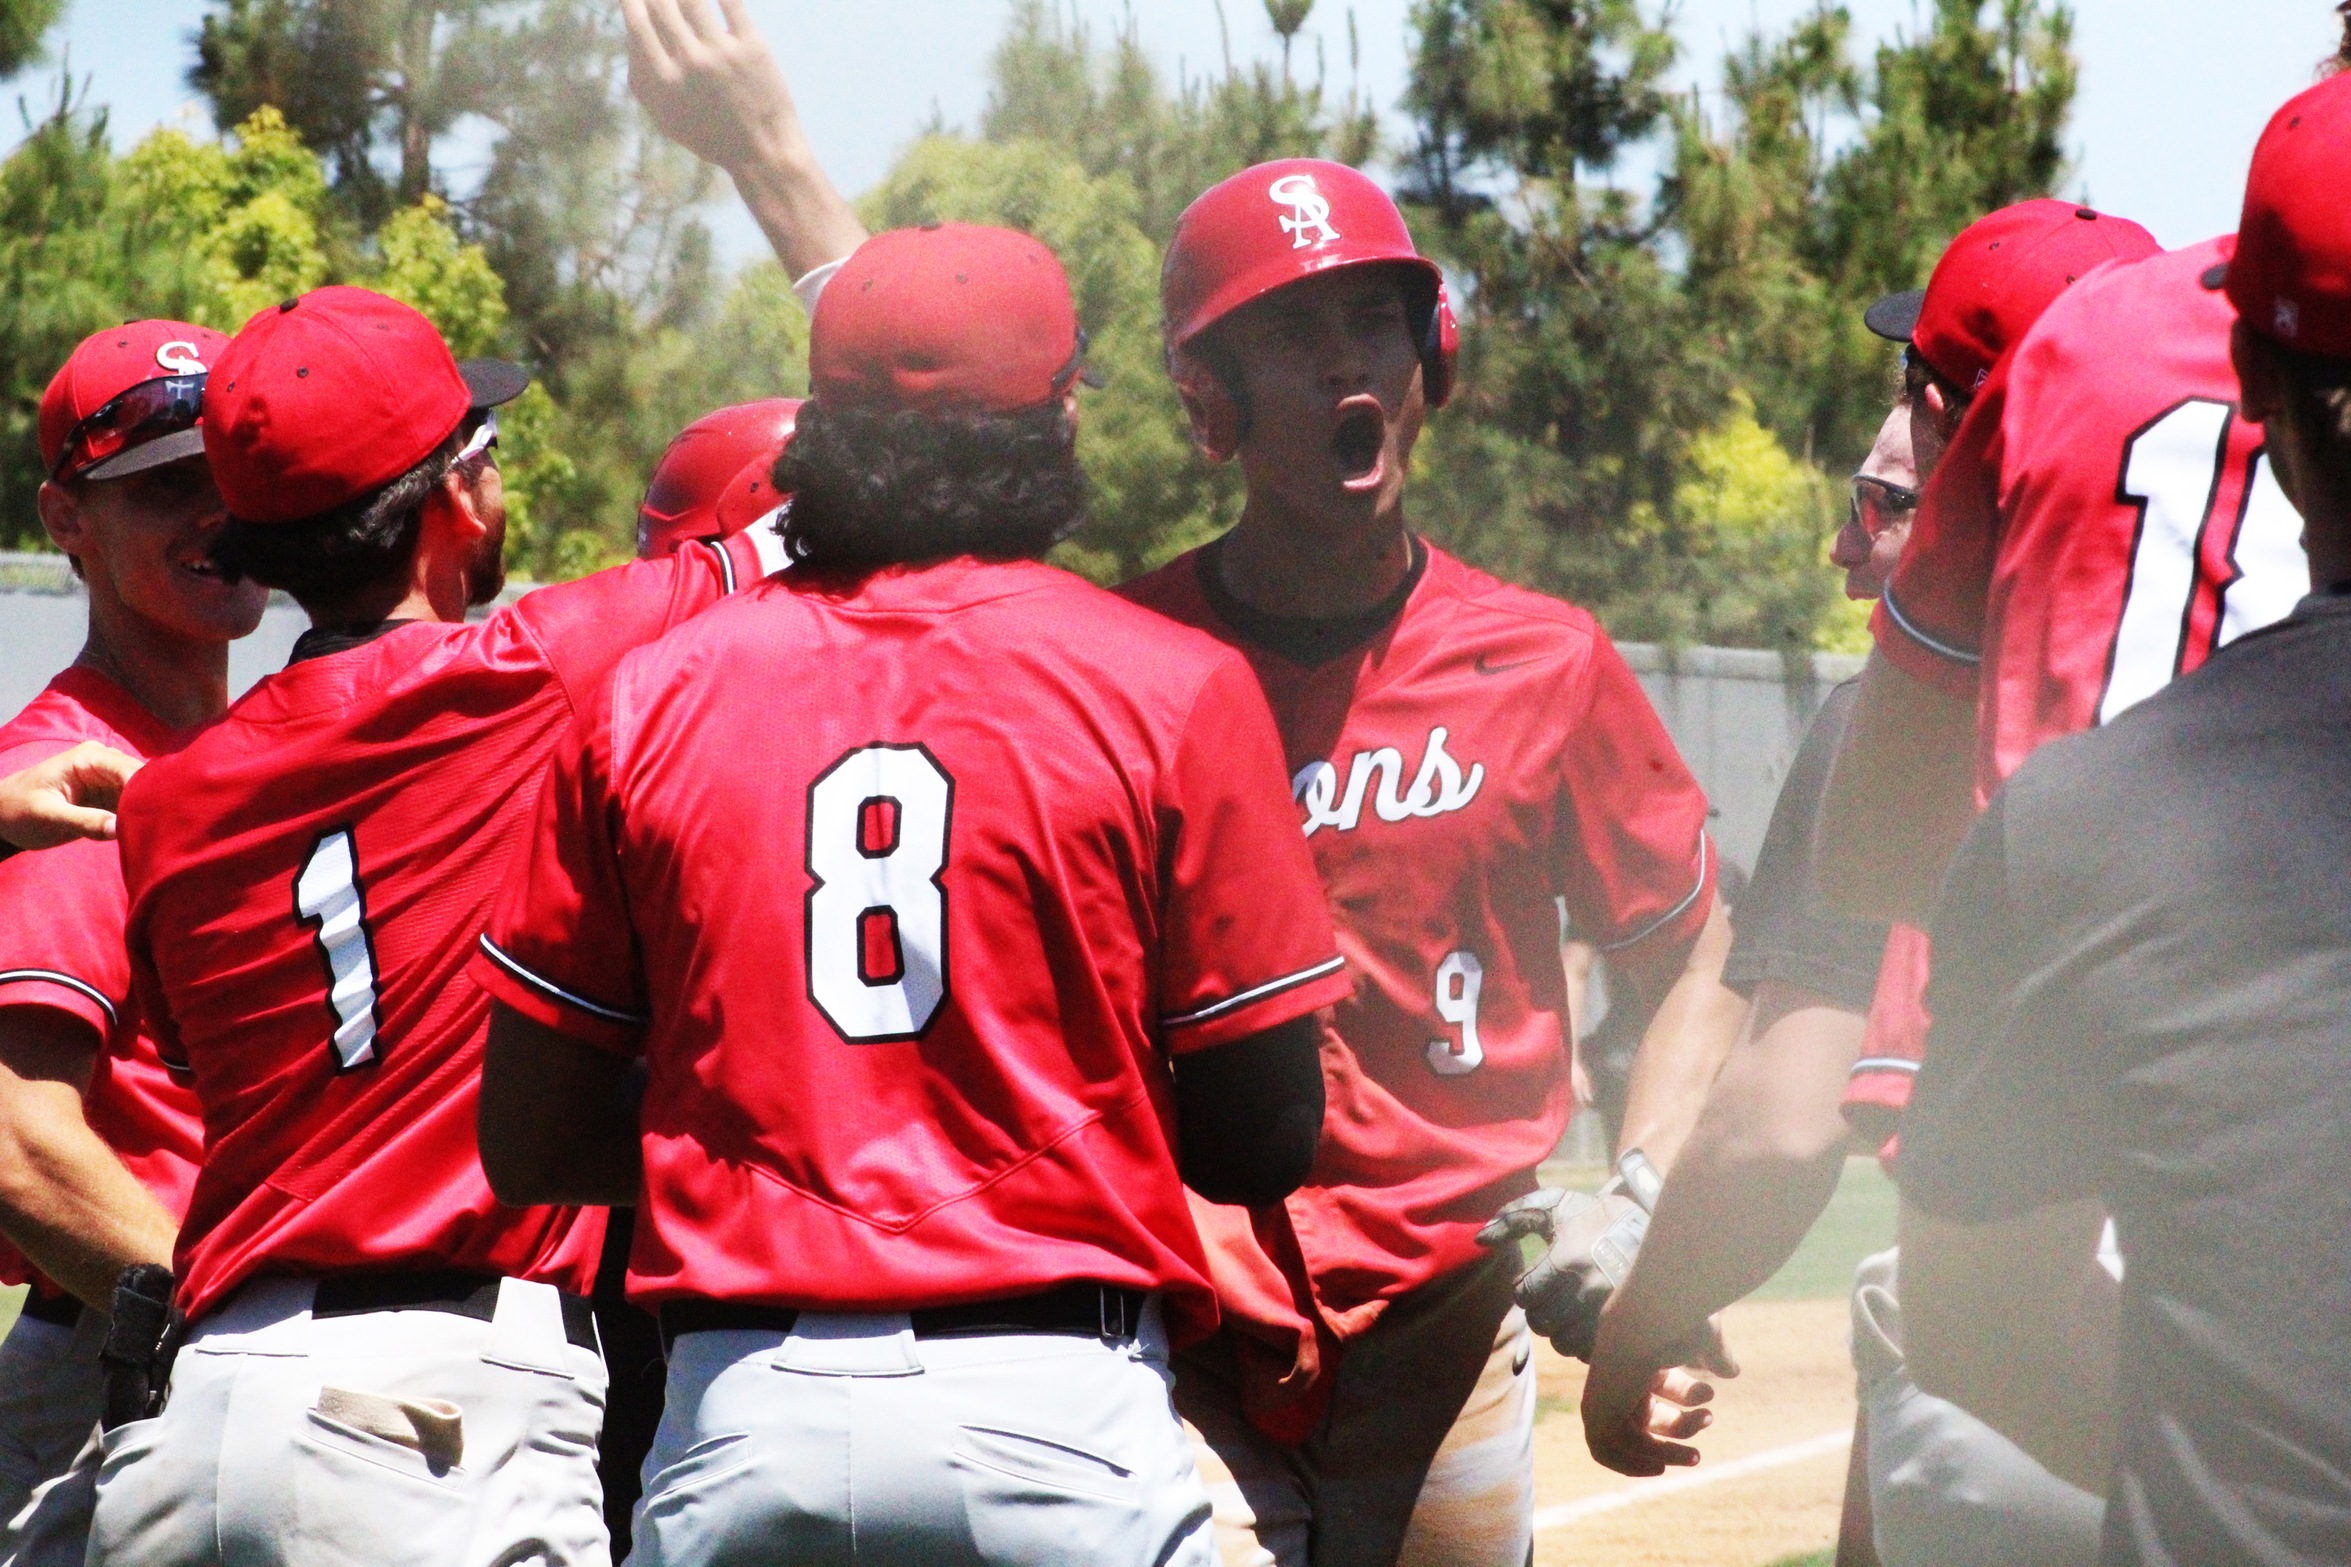 No. 4 Santa Ana Unloads for 19 to Complete Sweep of SBCC in SoCal Regional Matchup